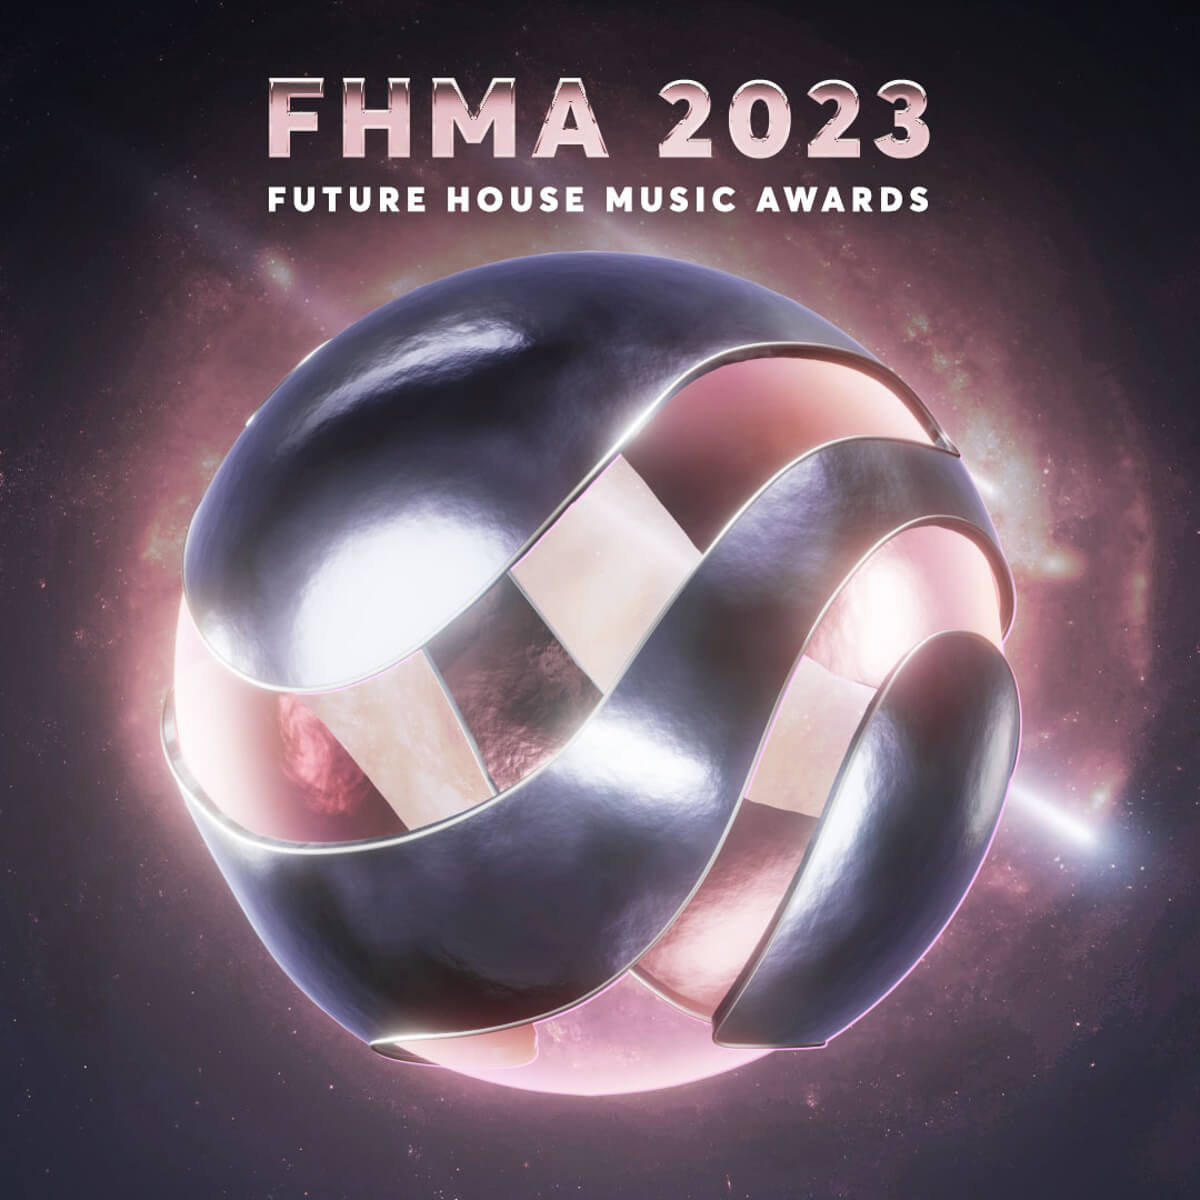 Future House Music Awards return and voting is now open